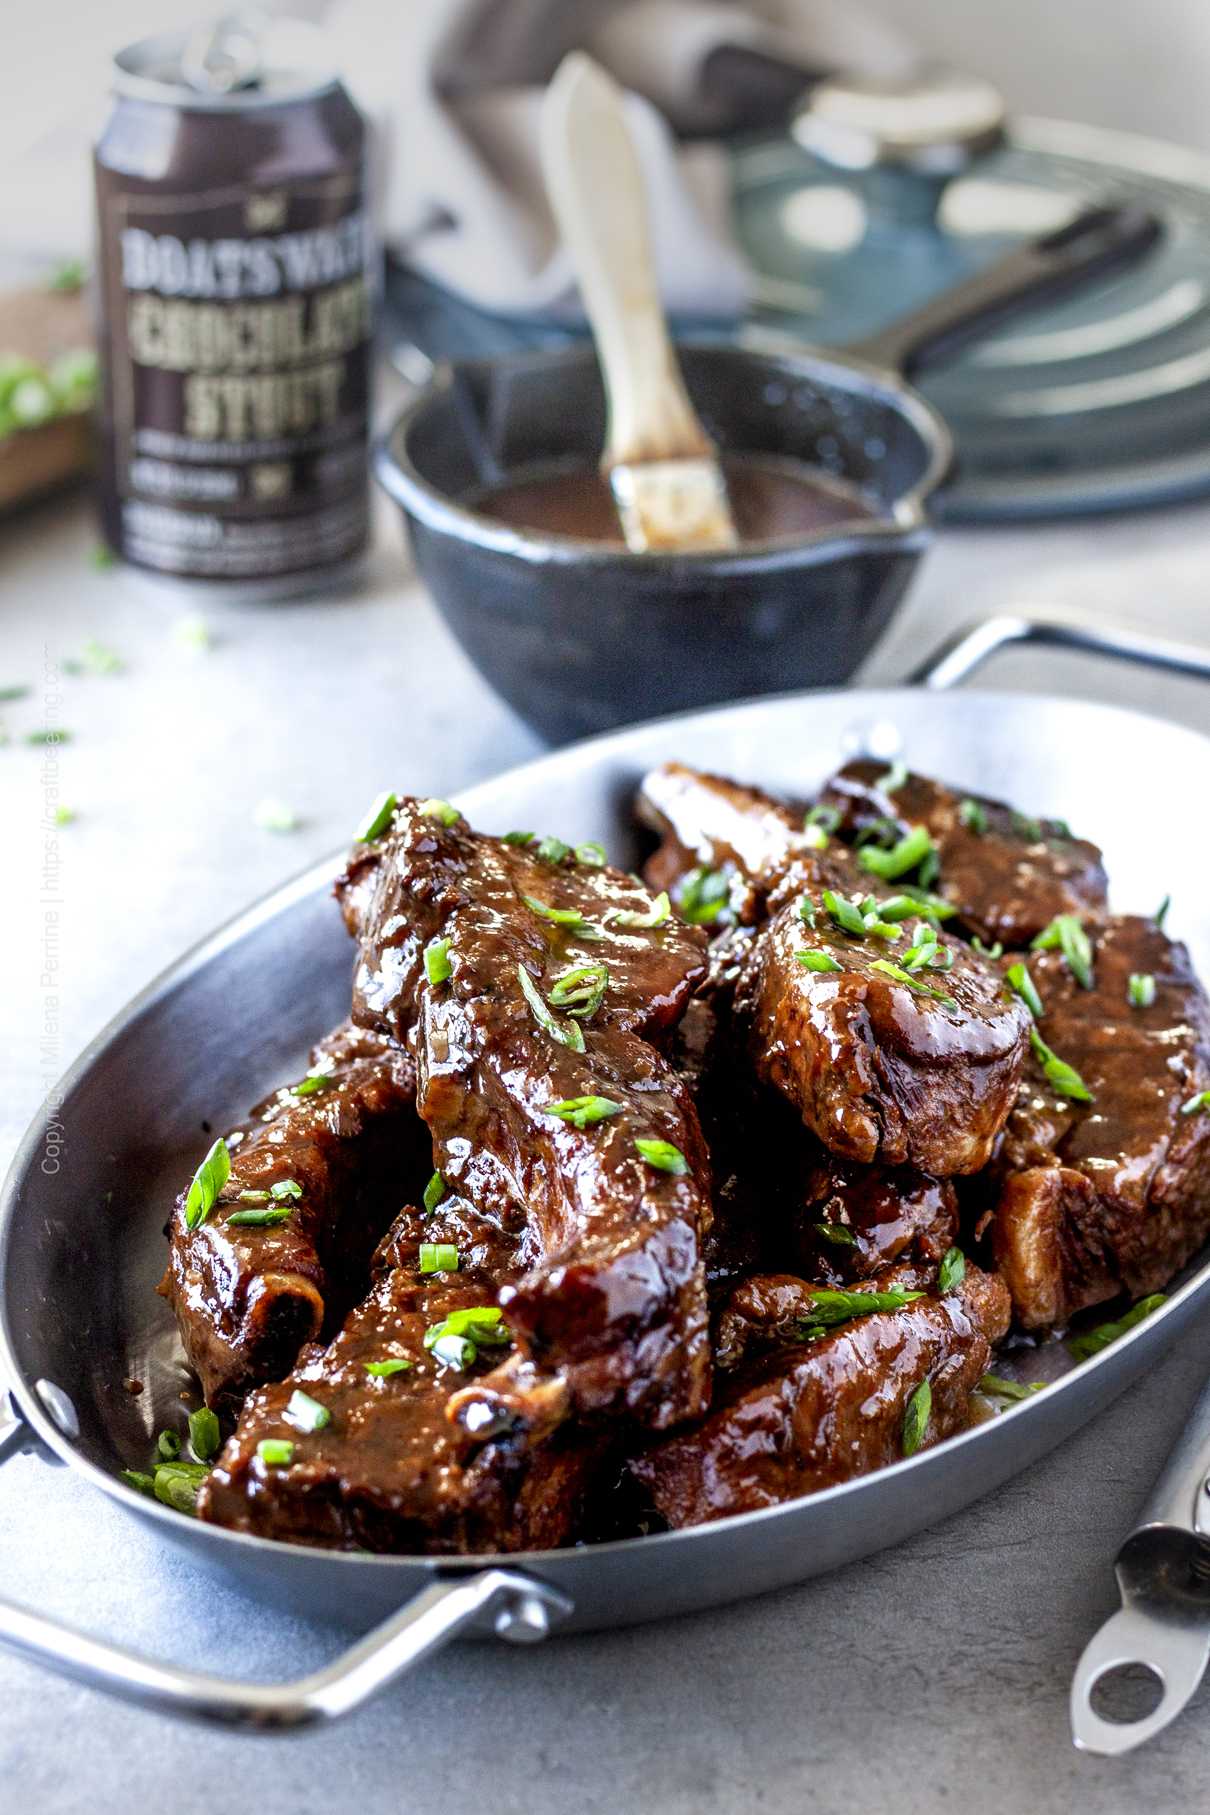 Pork country style ribs braised with stout and soy sauce, smothered in sauce.